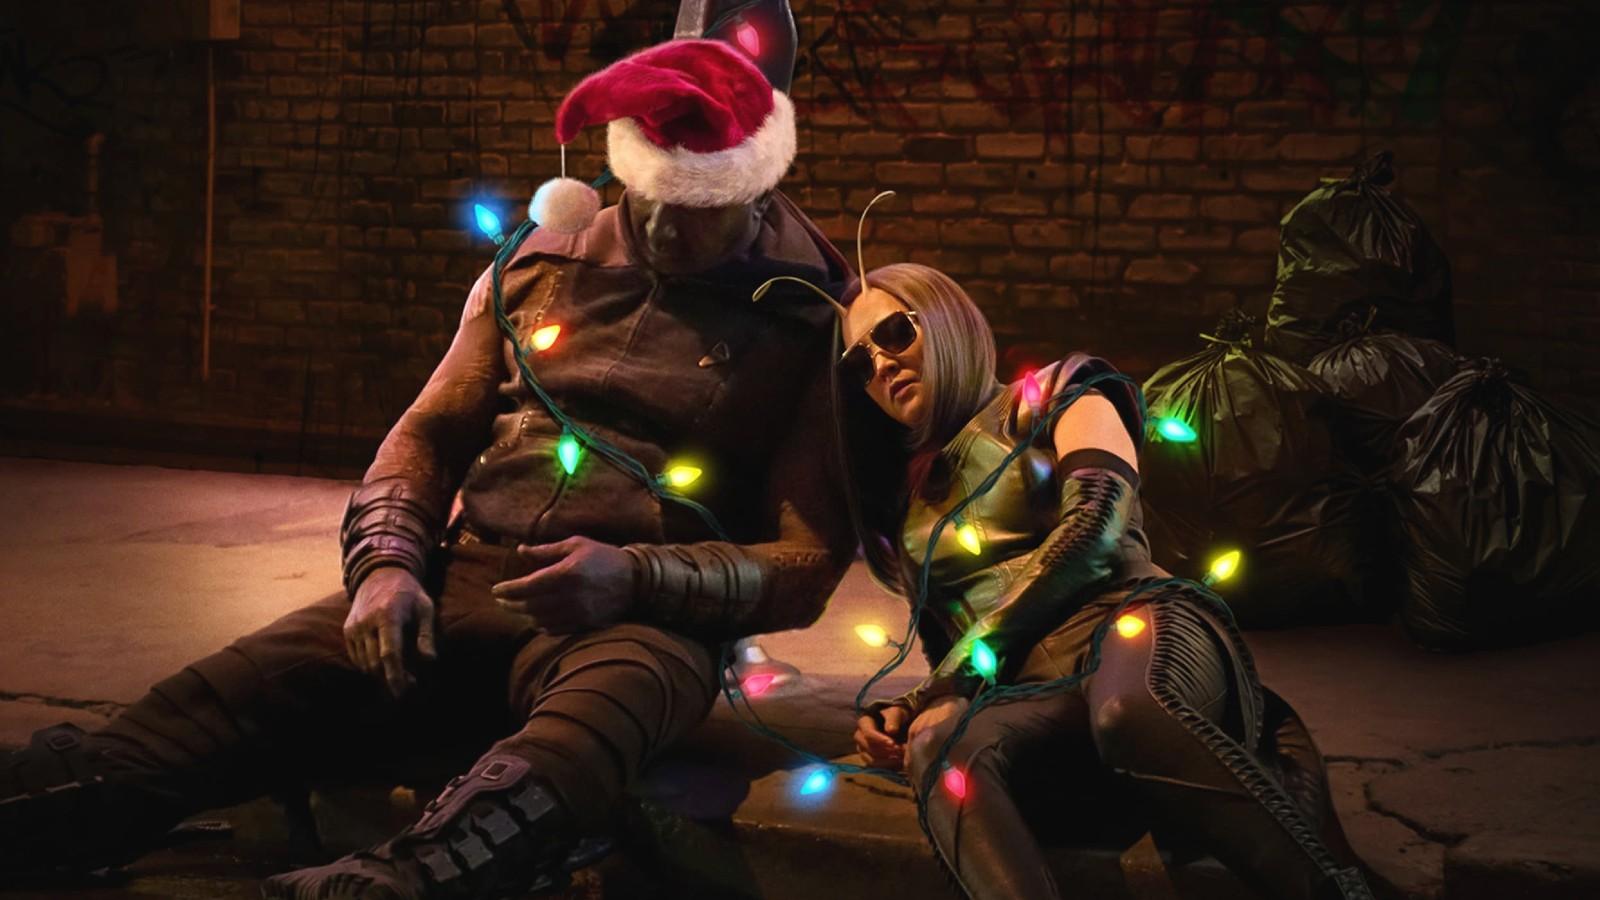 A still from the poster for the Guardians of the Galaxy Holiday Special